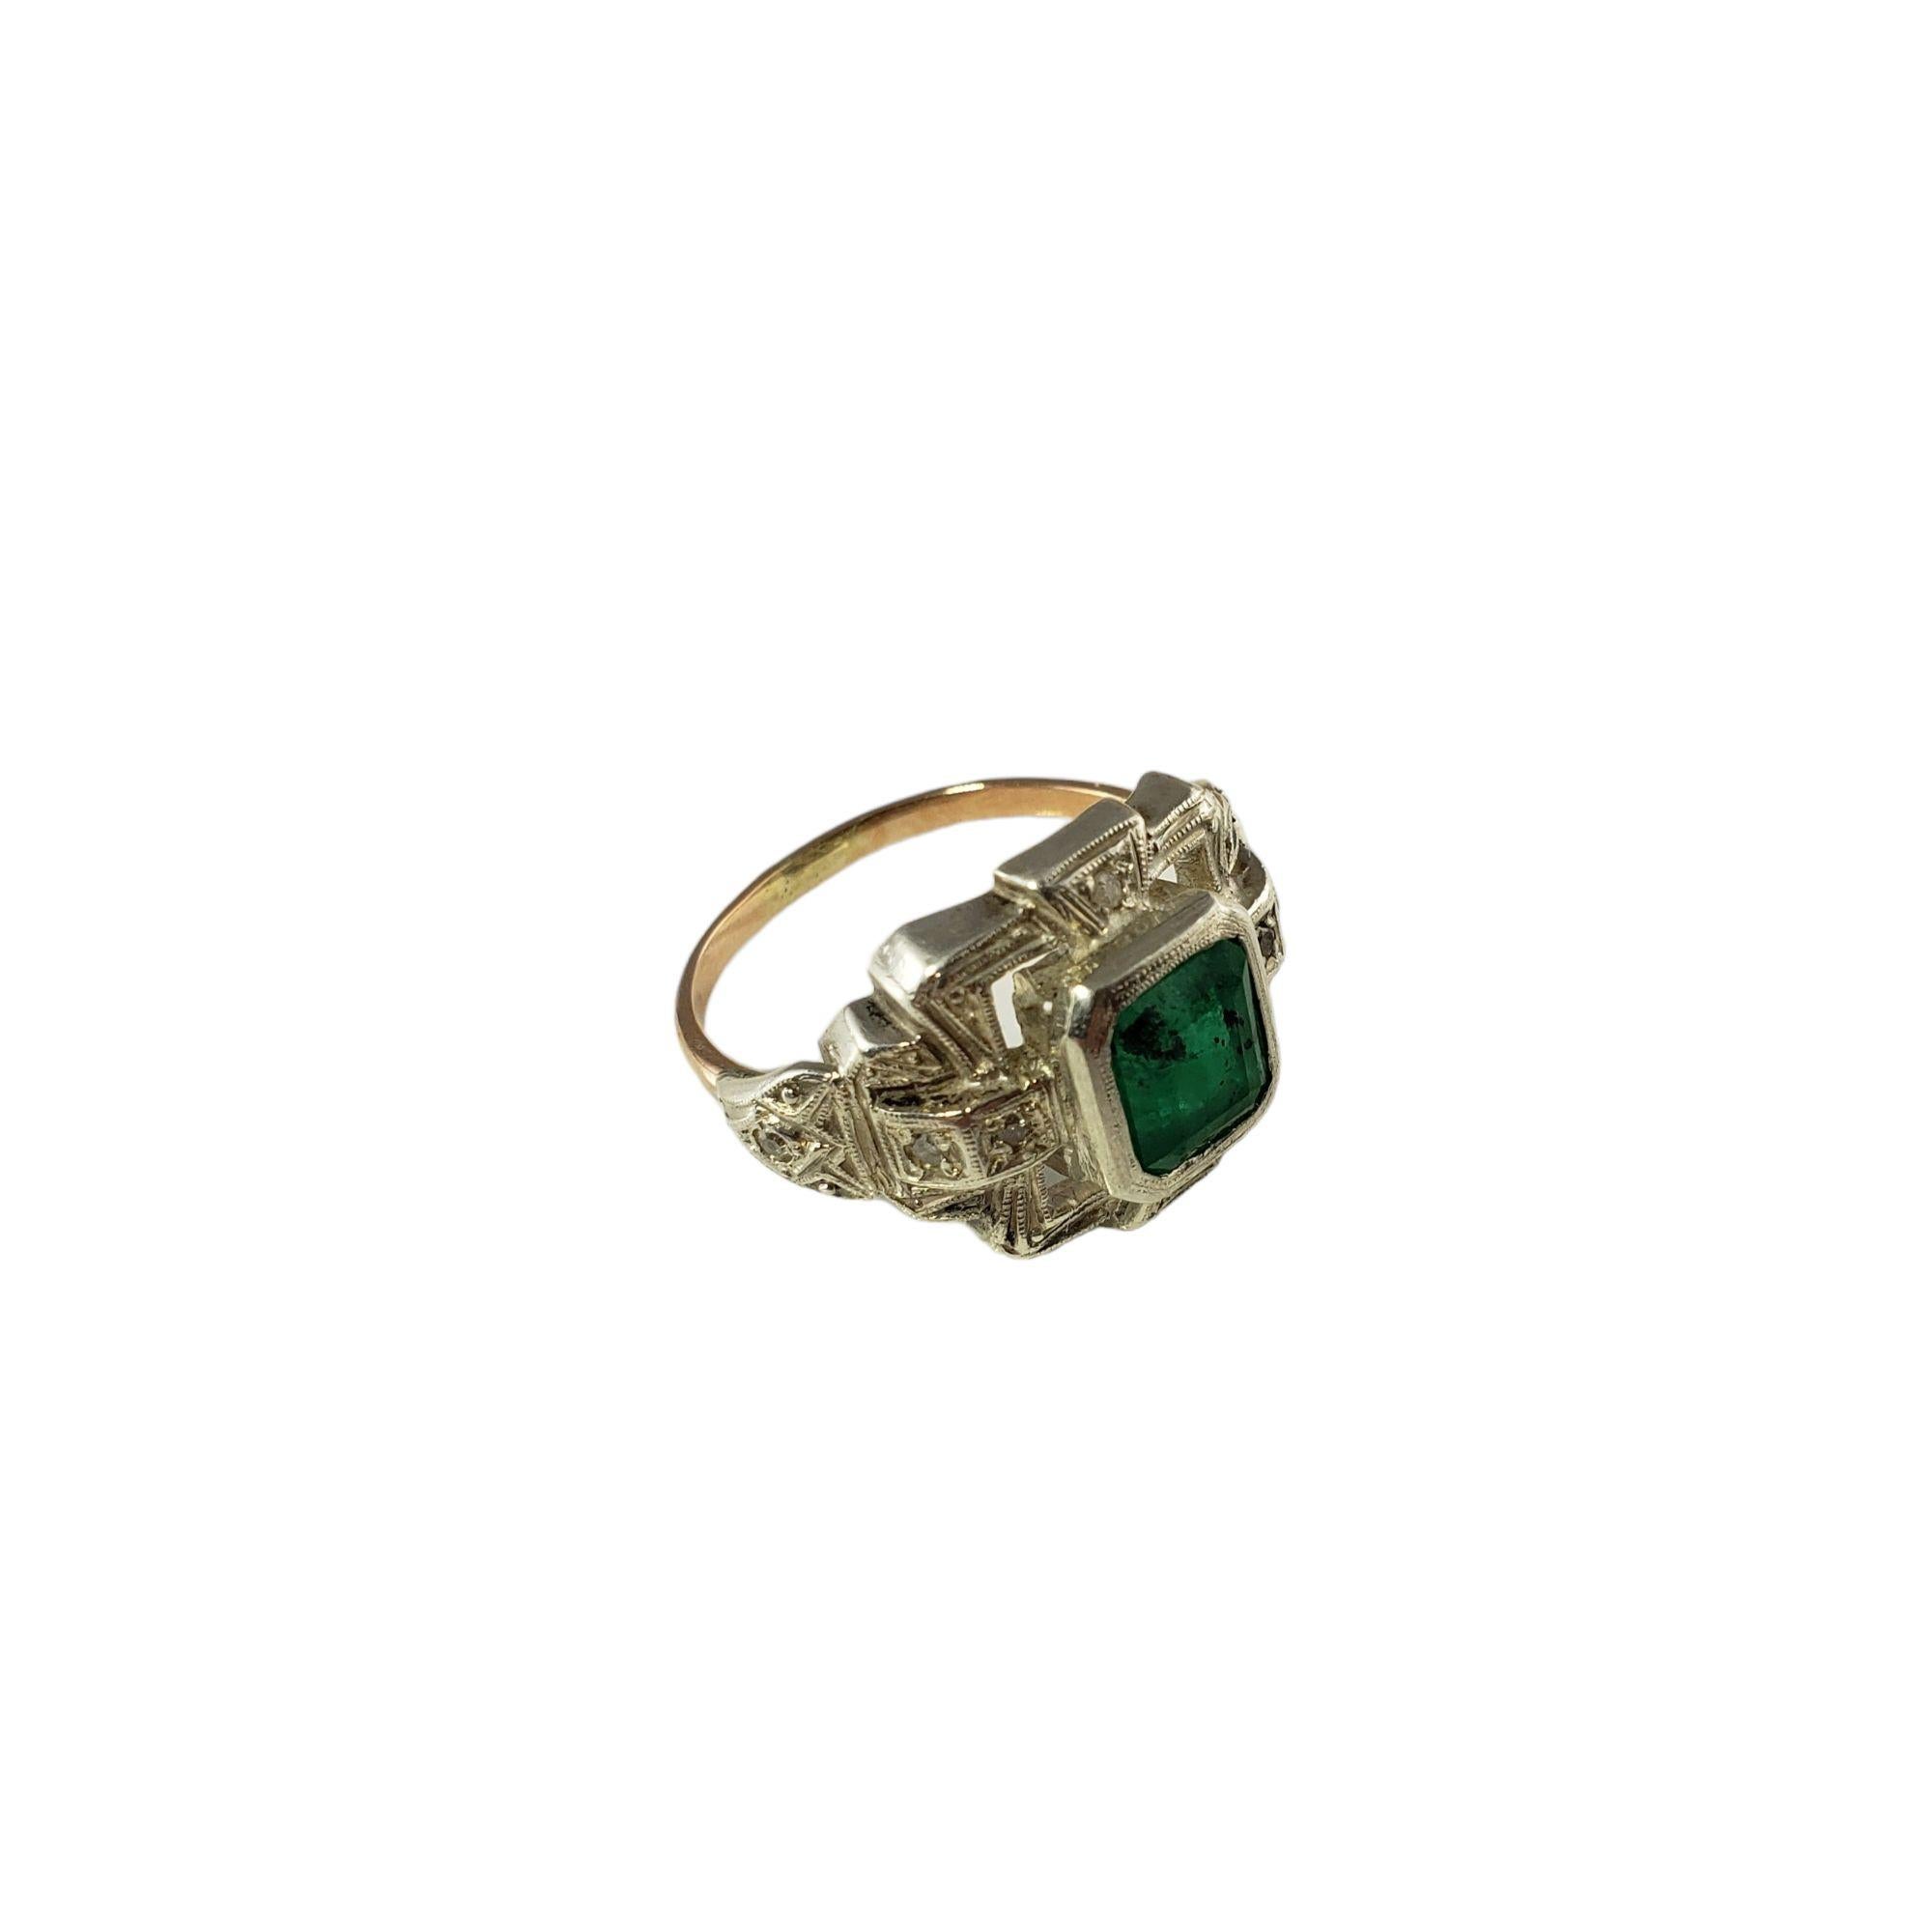 10 Karat Yellow/White Gold Emerald and Diamond Ring #14008 In Good Condition For Sale In Washington Depot, CT